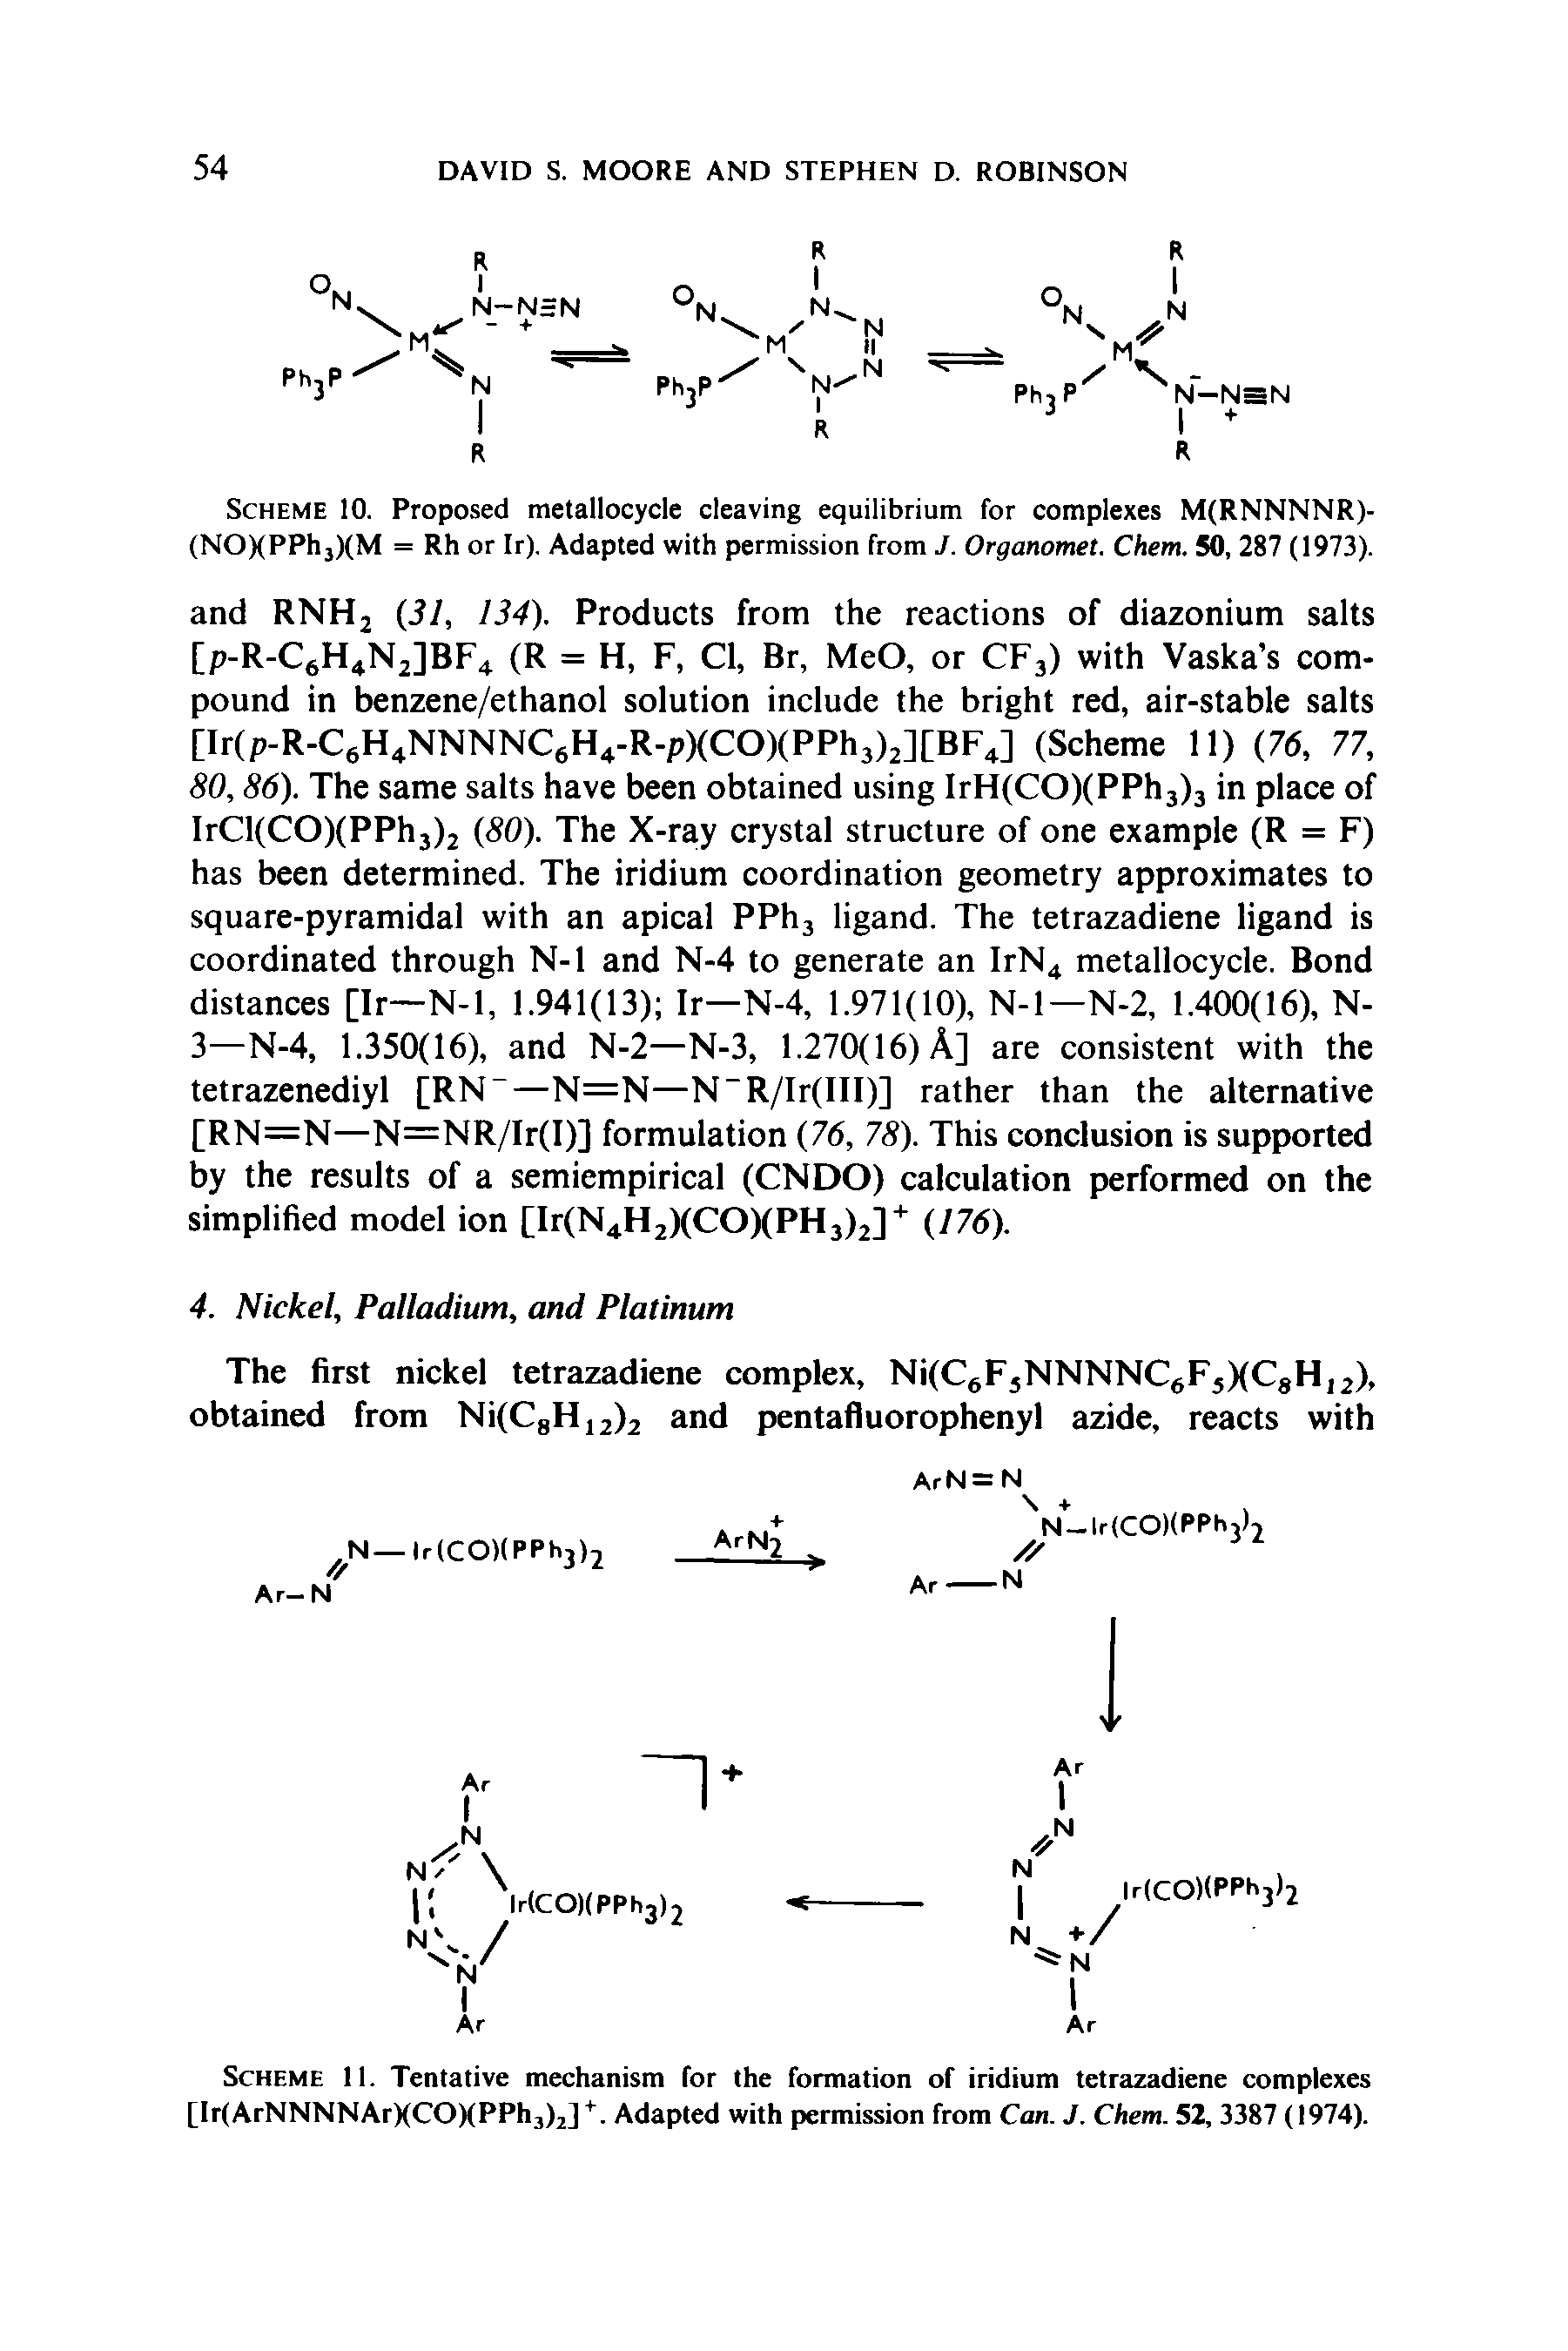 Scheme II. Tentative mechanism for the formation of iridium tetrazadiene complexes [IrlArNNNNArXCOXPPhjlj]. Adapted with permission from Can. J. Chem. 52, 3387 (1974).